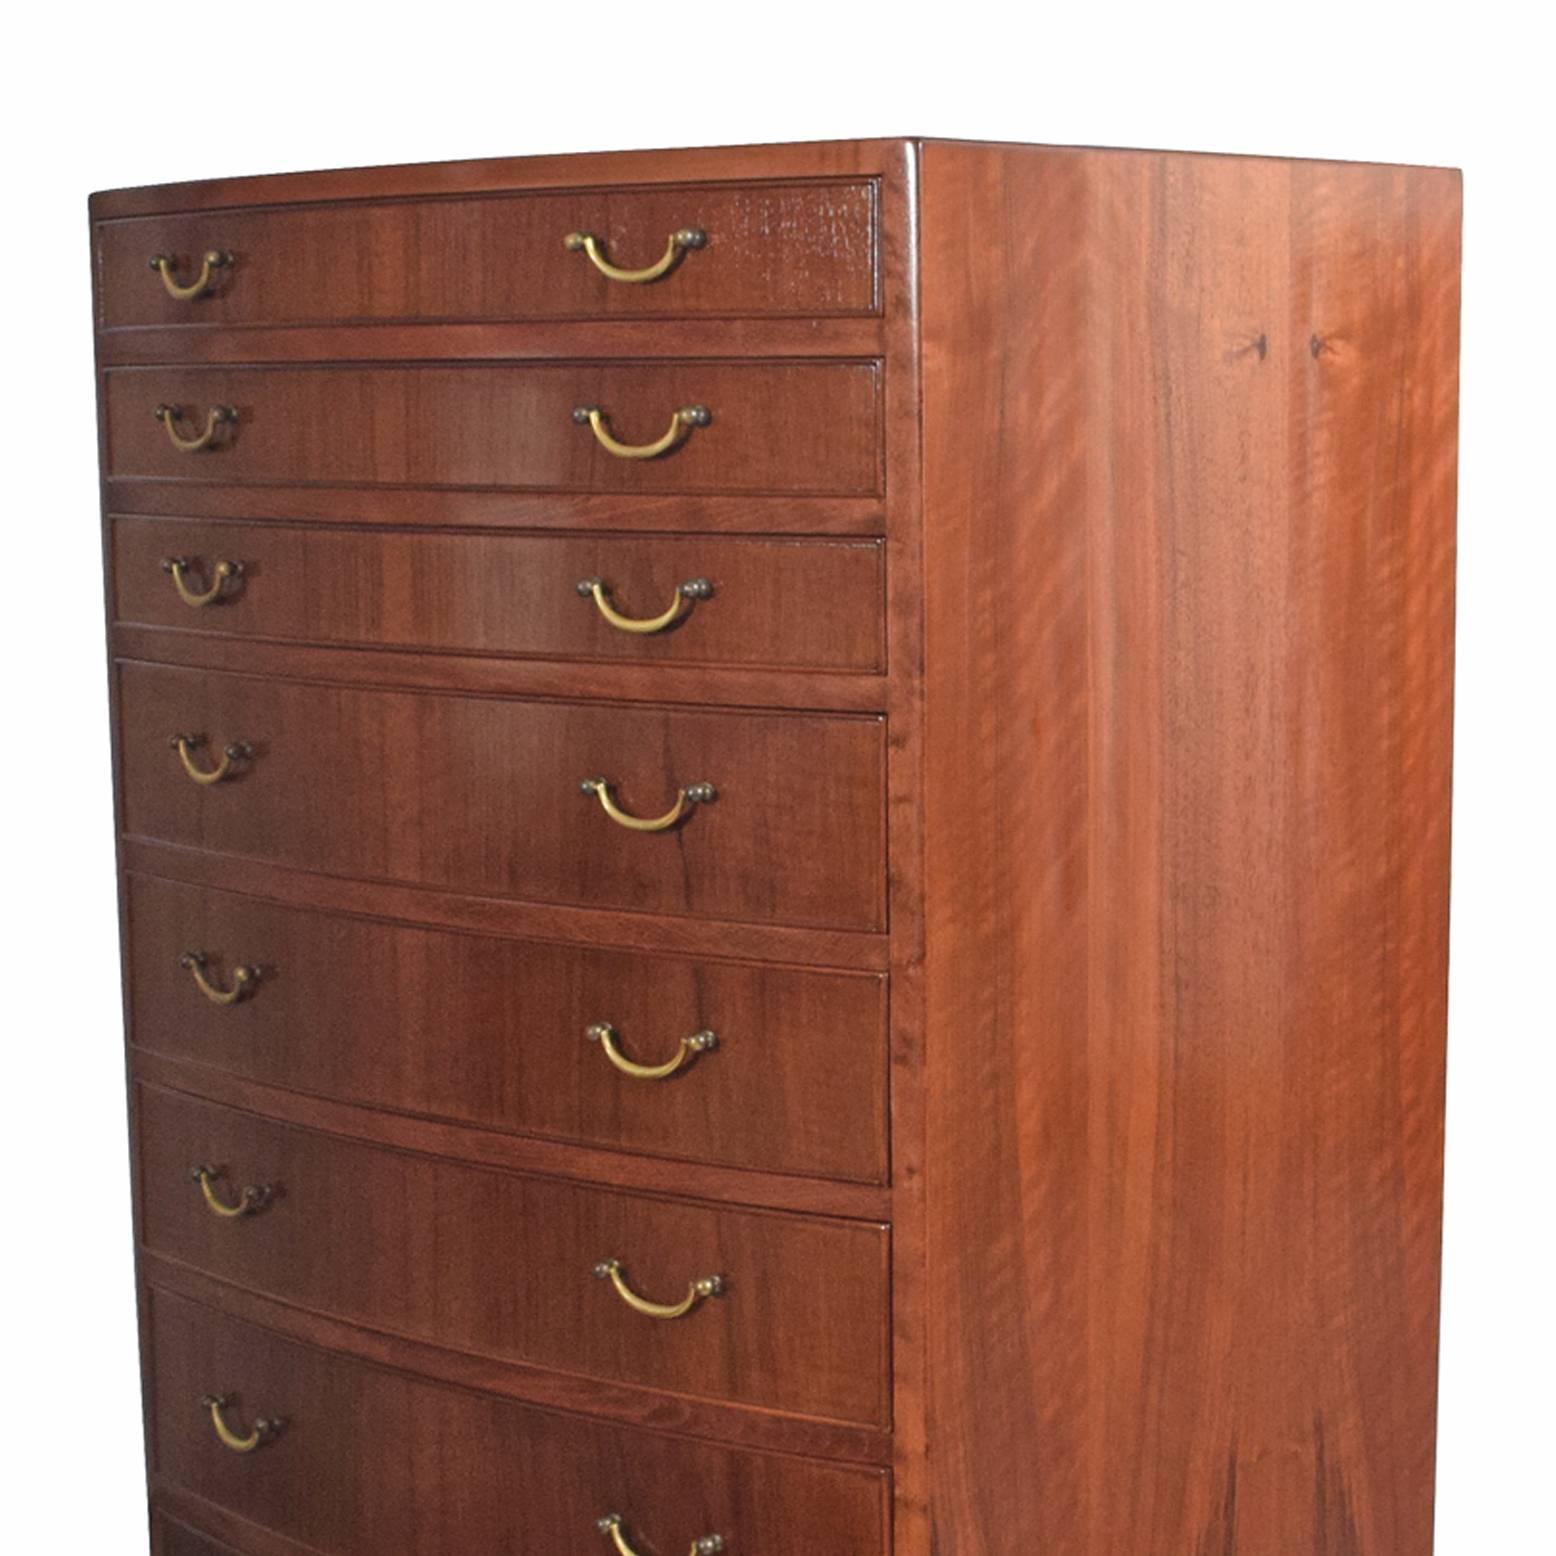 Danish Tall Chest of Drawers by Ole Wanscher